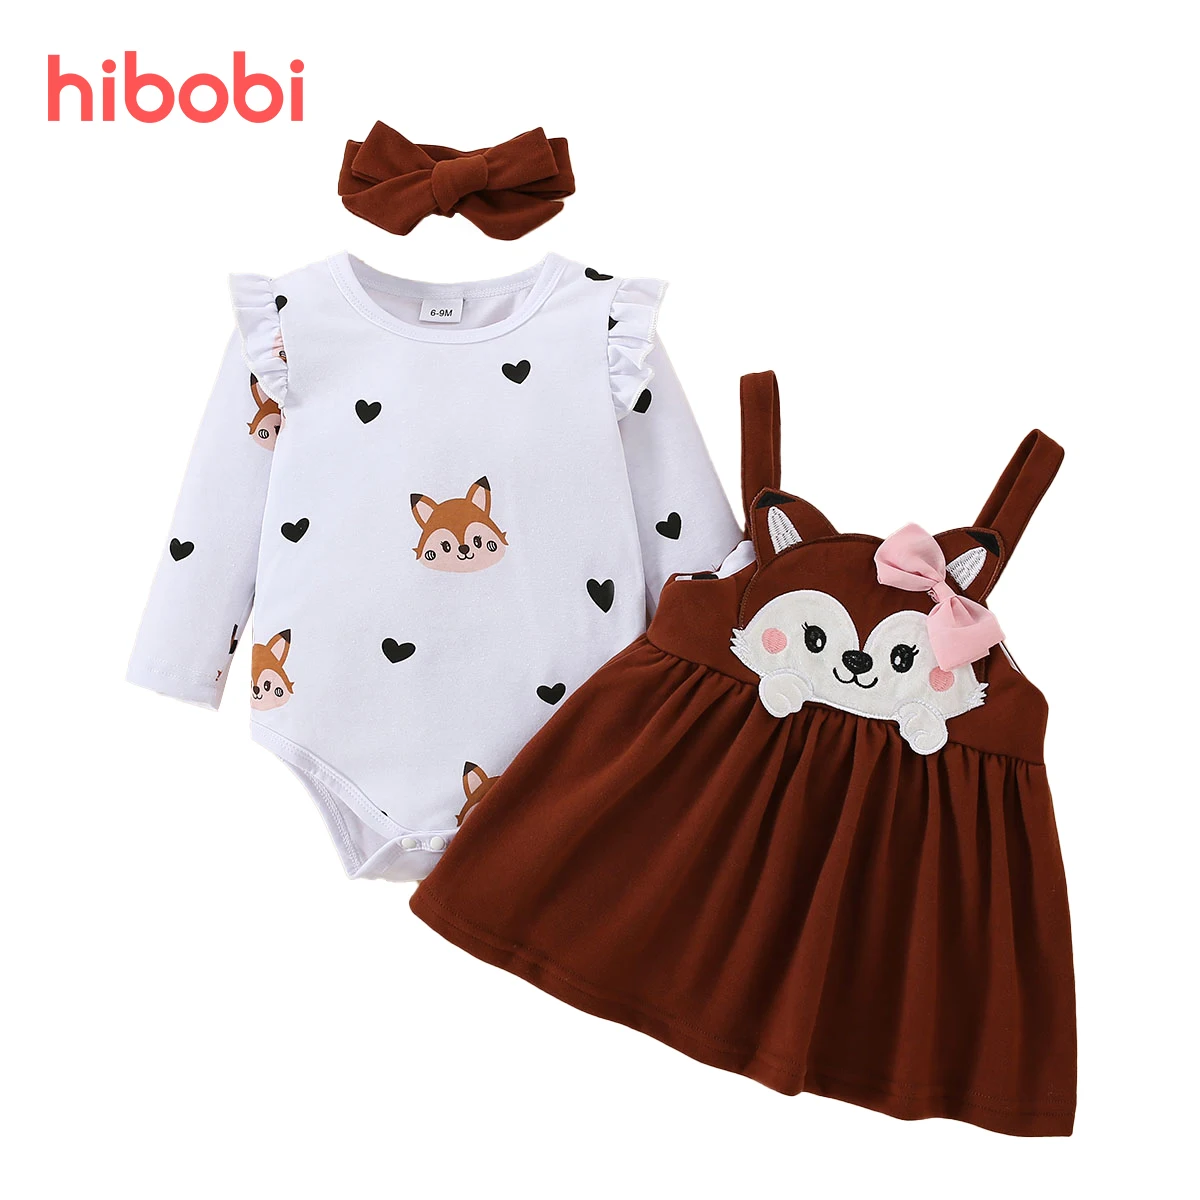 

hibobi 2pcs Baby Girl Long Fly Sleeve Romper & Solid Bowknot Decor Strap Dress for Newborn Baby Girl Clothes Valentine's Day